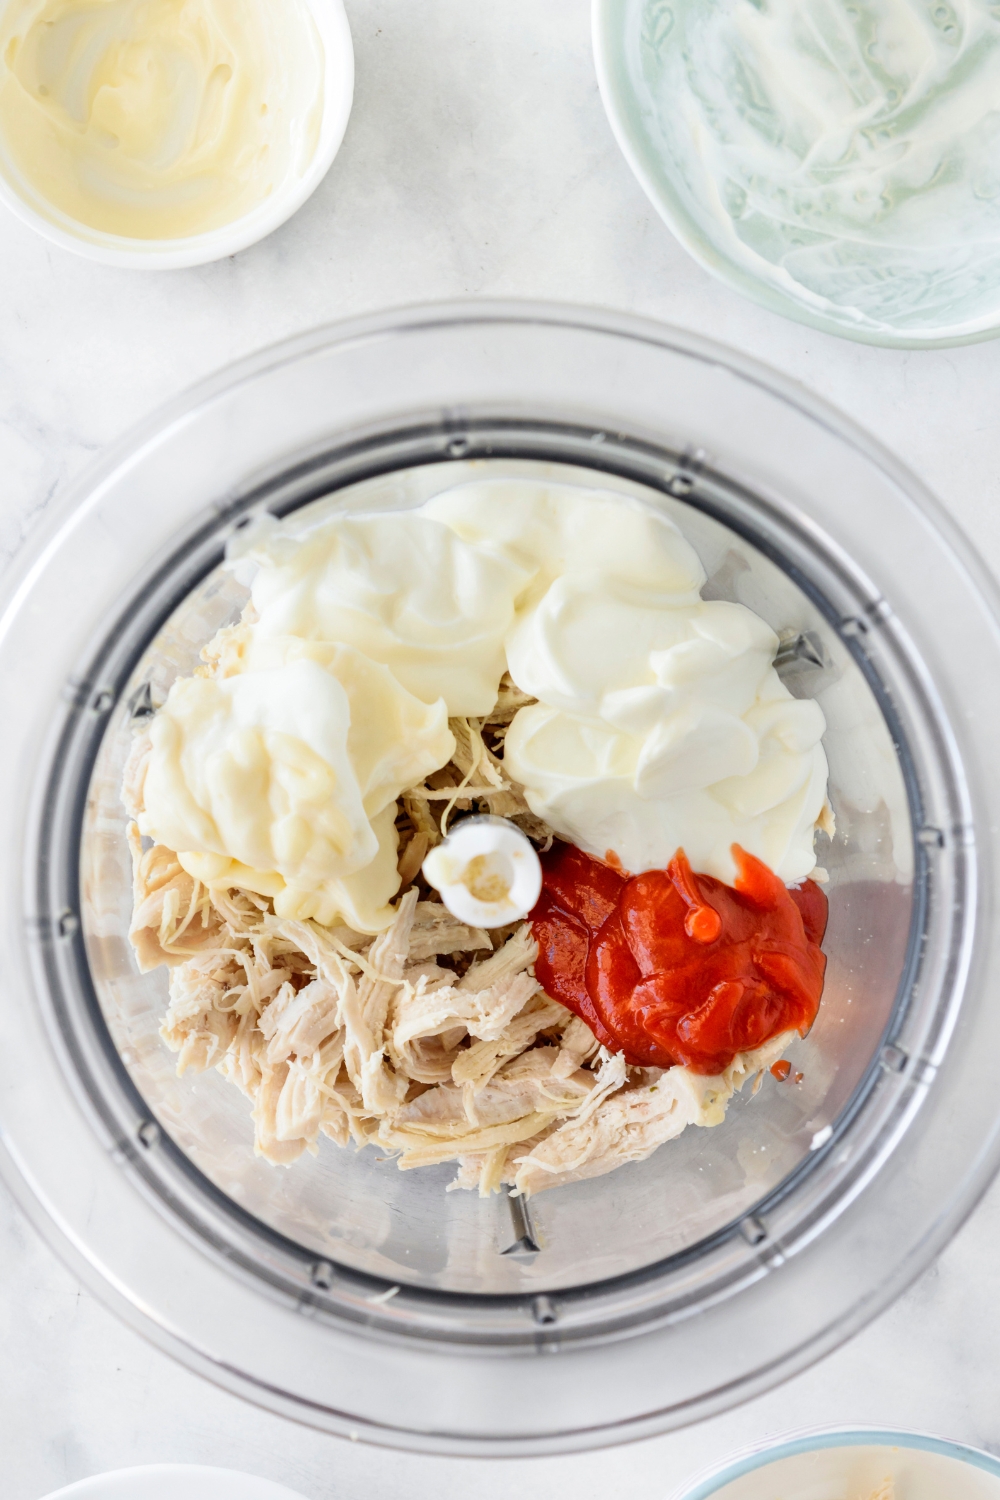 Sour cream, mayo, hot sauce, and shredded chicken in a food processor.